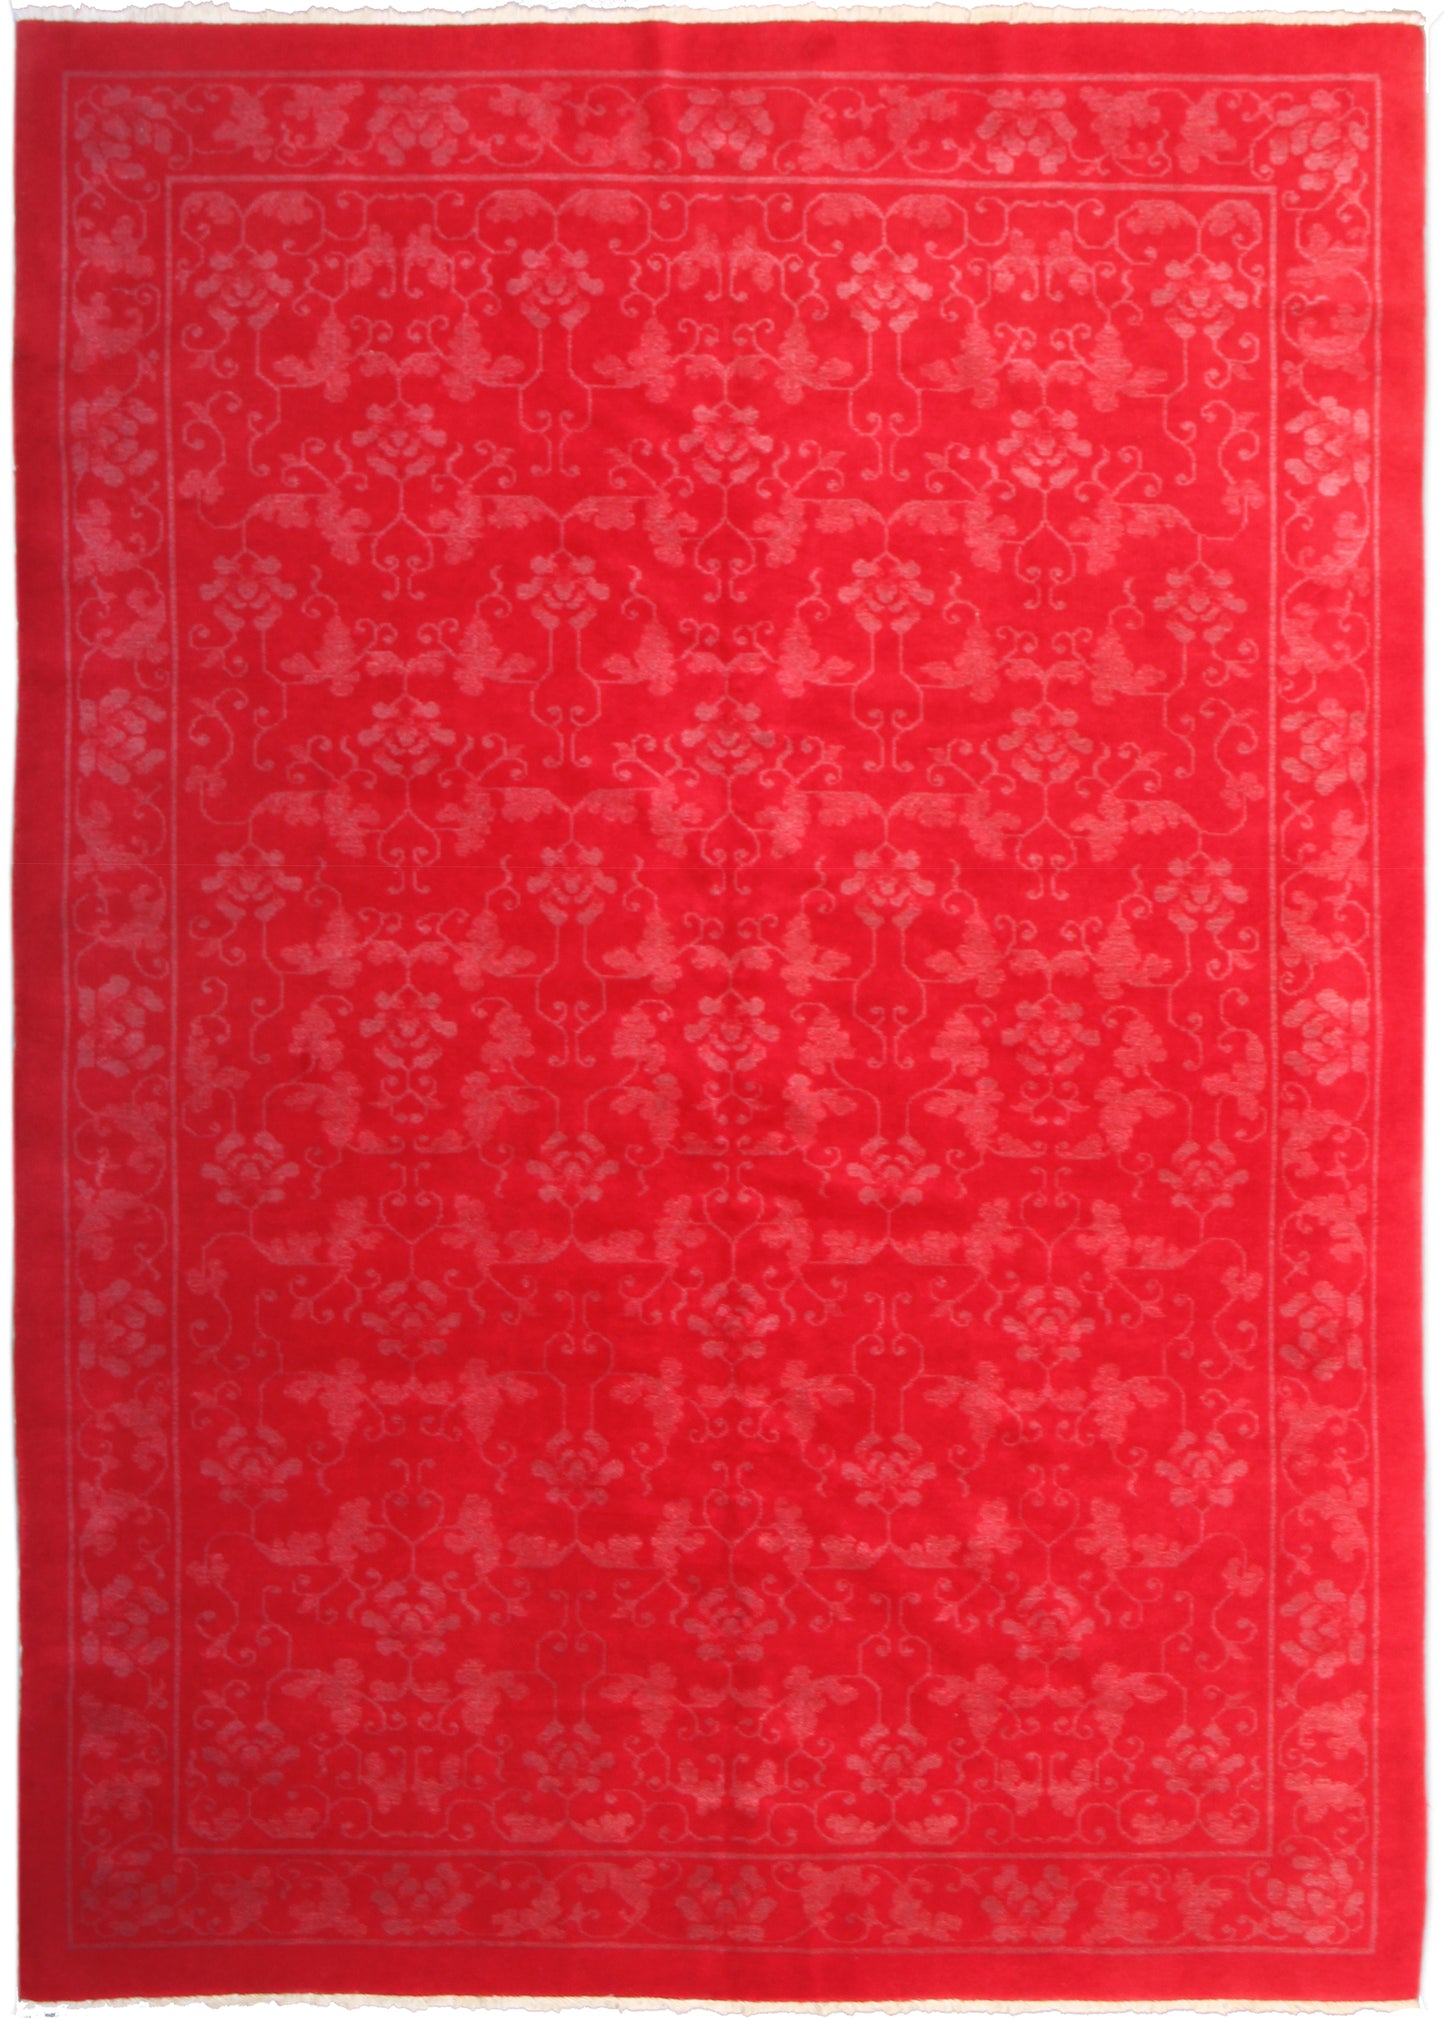 6x8 One Red Chinese Pattern Rug